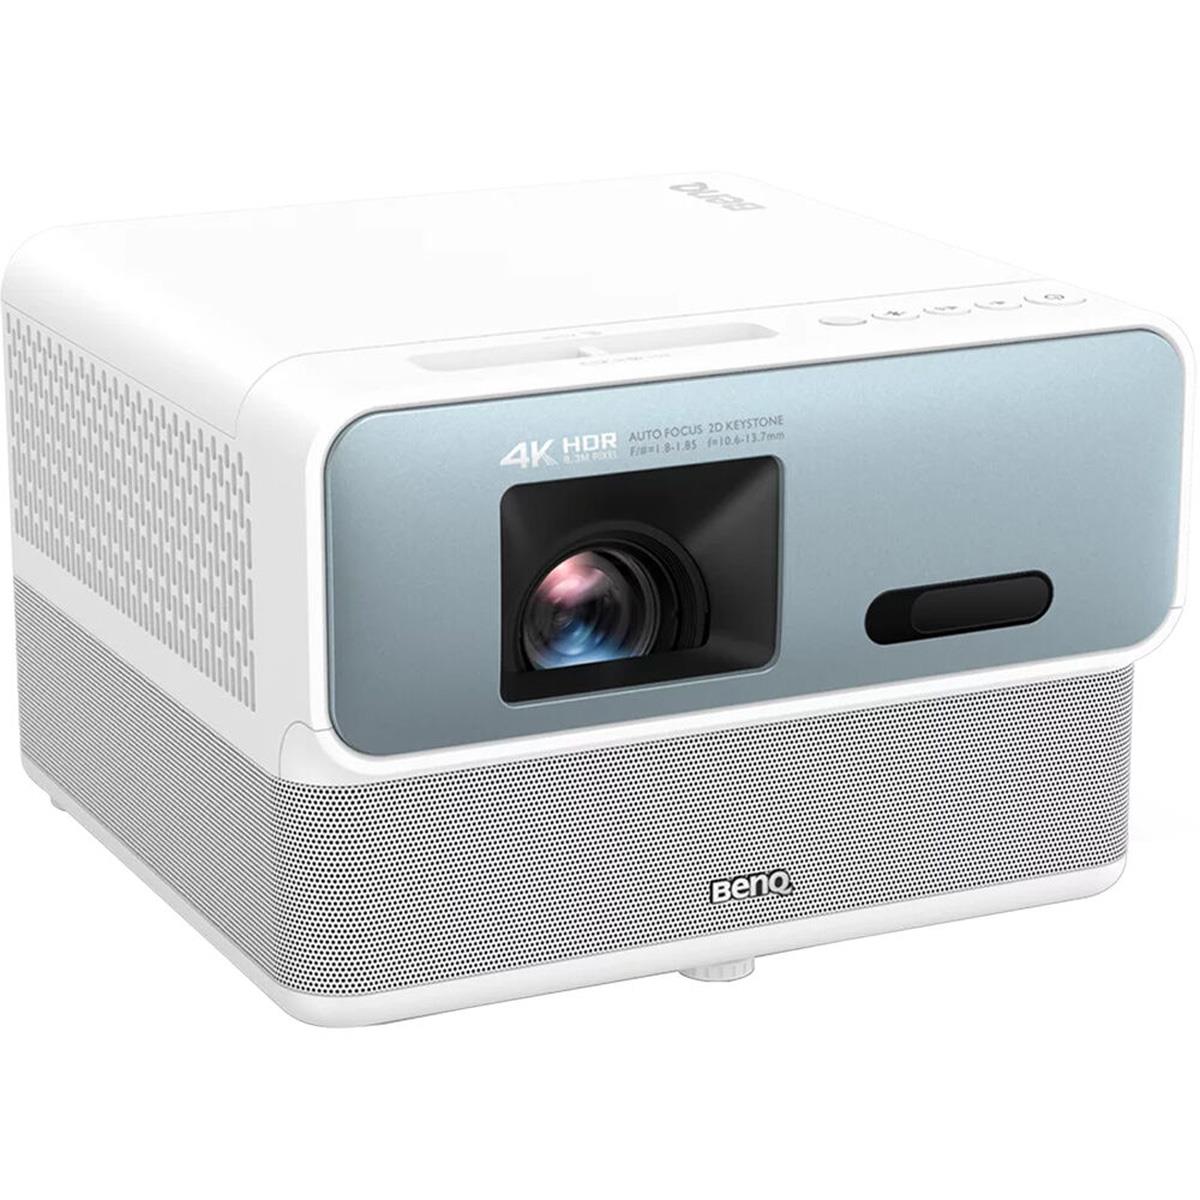 BenQ GP500 4K HDR LED Smart Home Theater Projector $1199 + free s/h